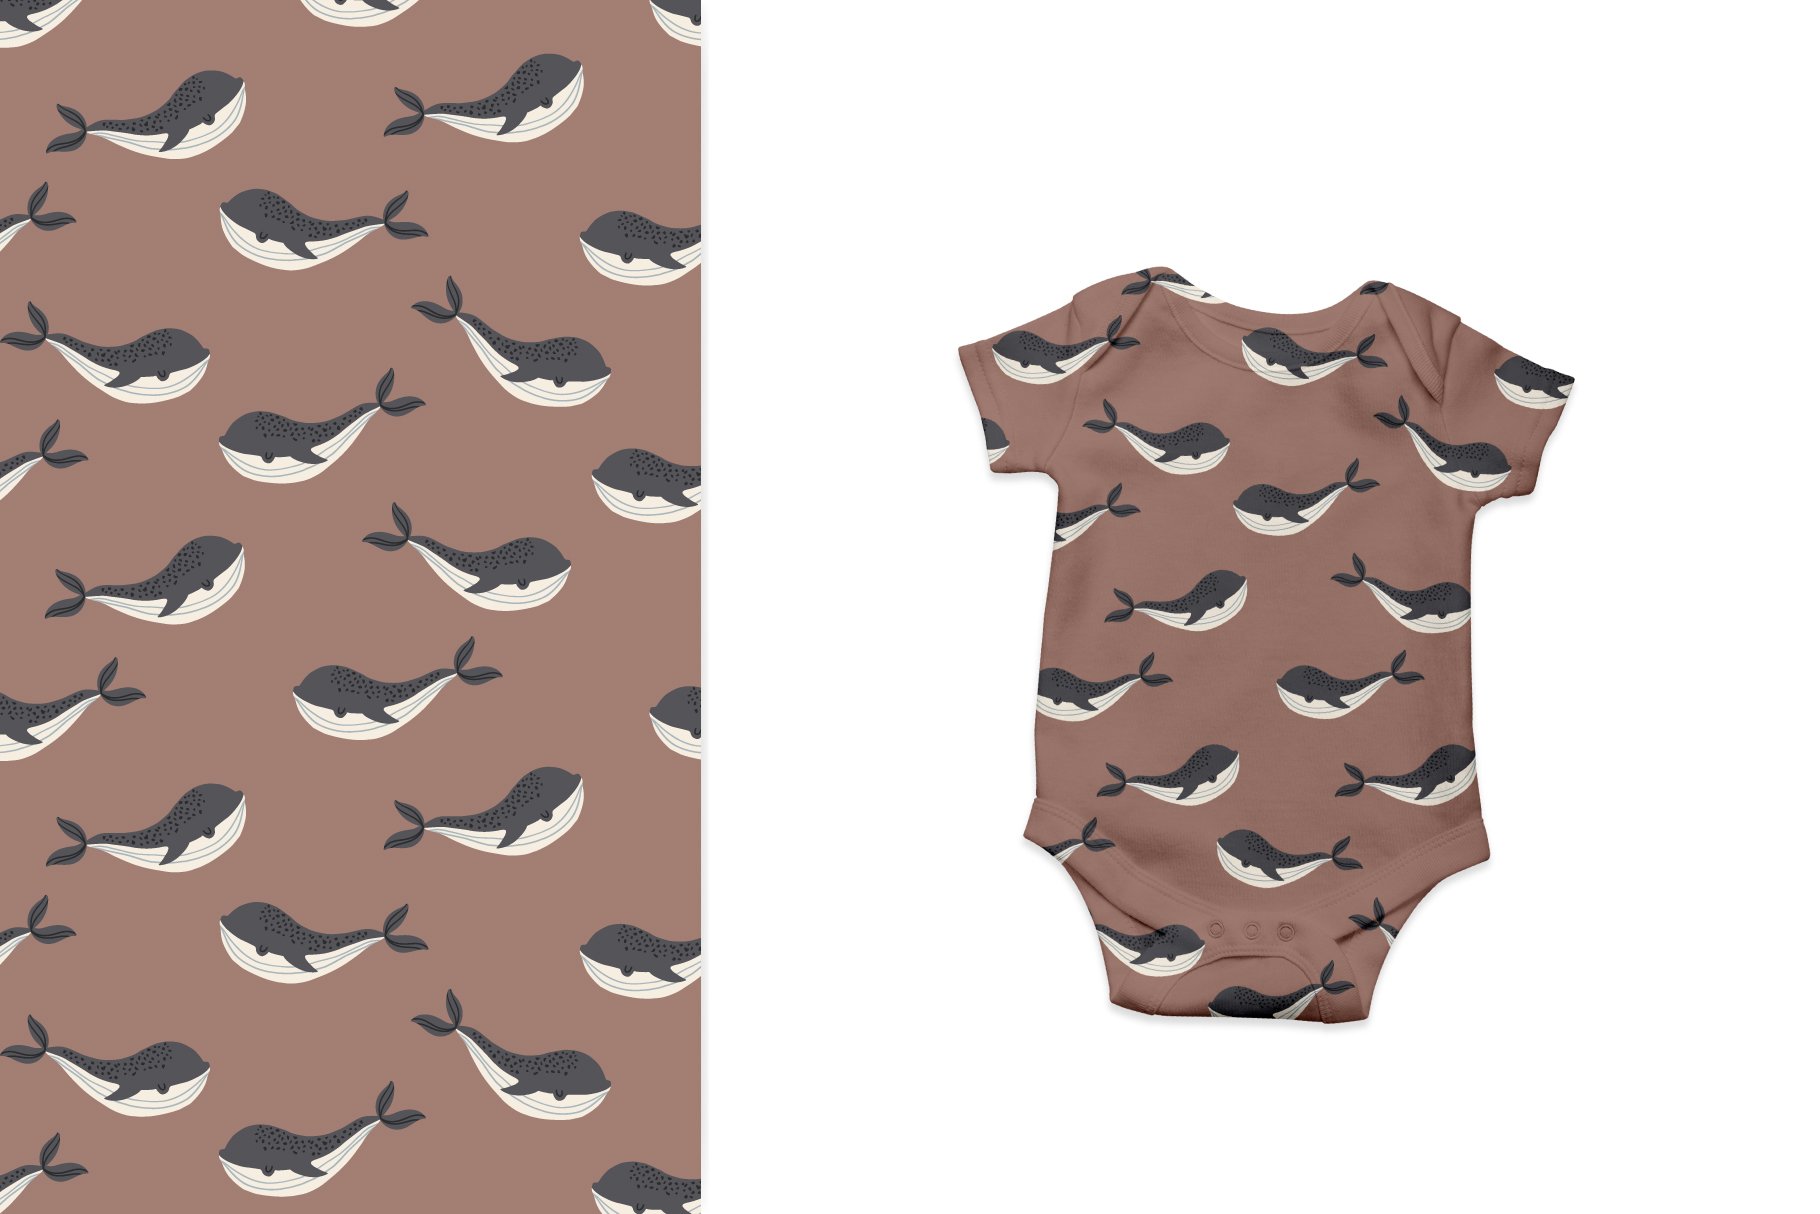 Baby brown bodysuit design with whales.